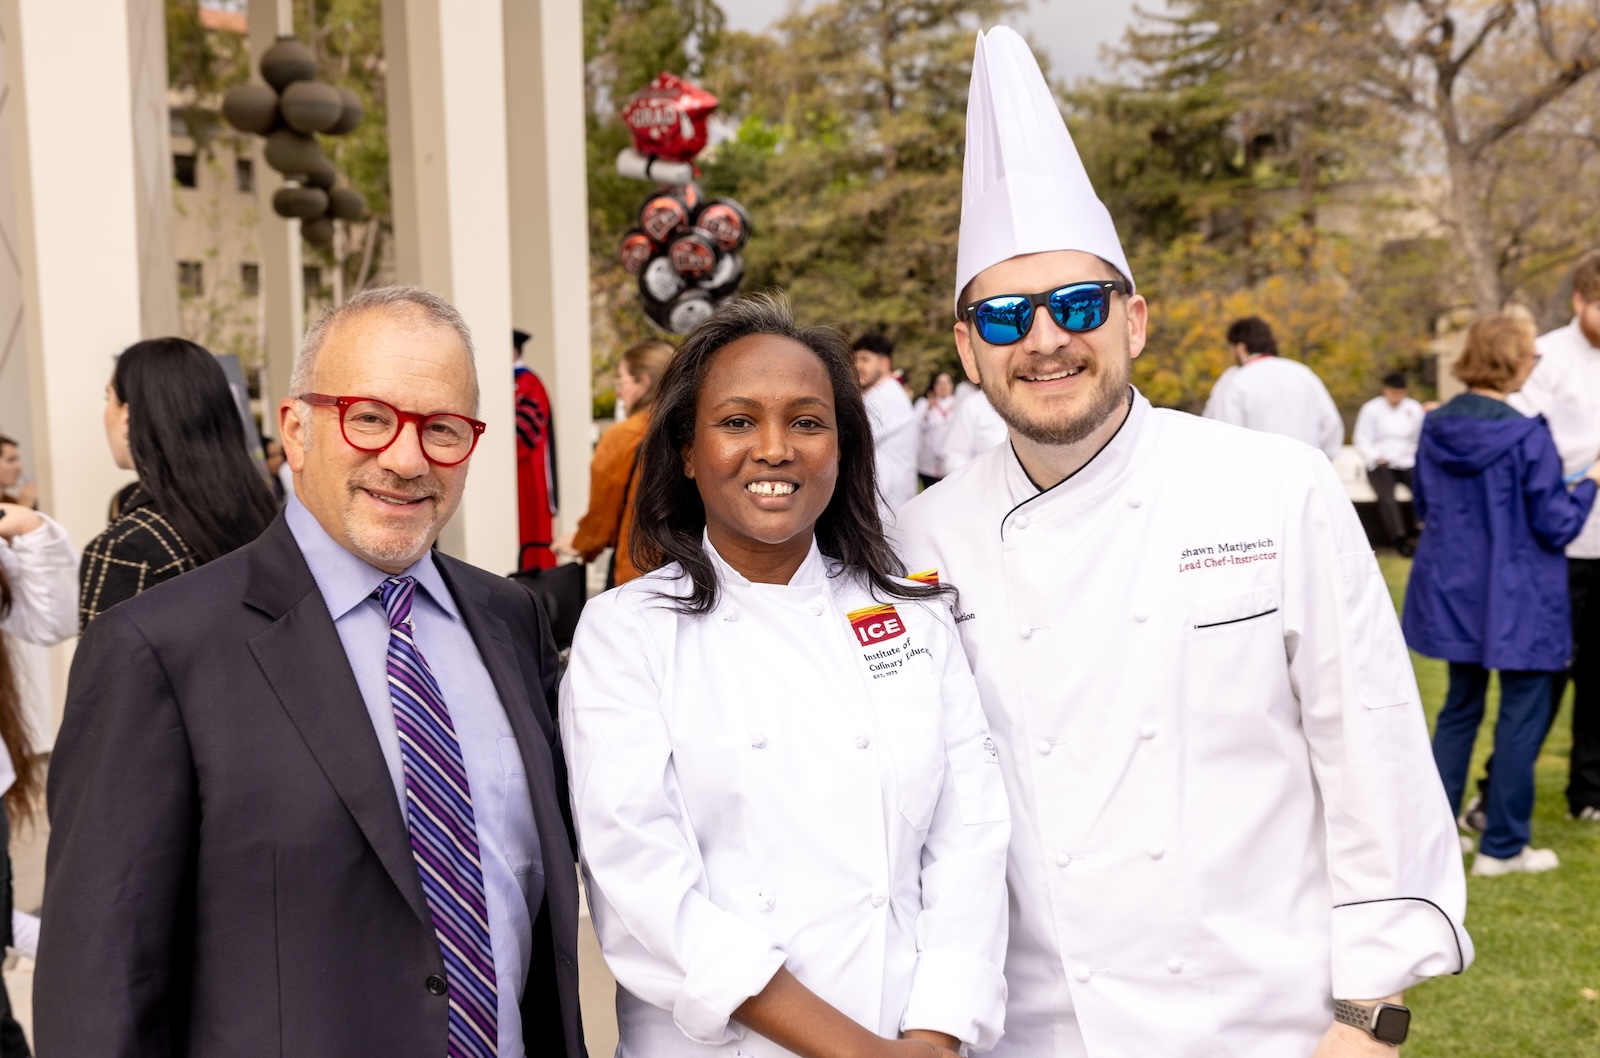 Culinary school online student Meymuna Hussein smiles with ICE owner and chairman Rick Smilow and Chef Shawn Matijevich